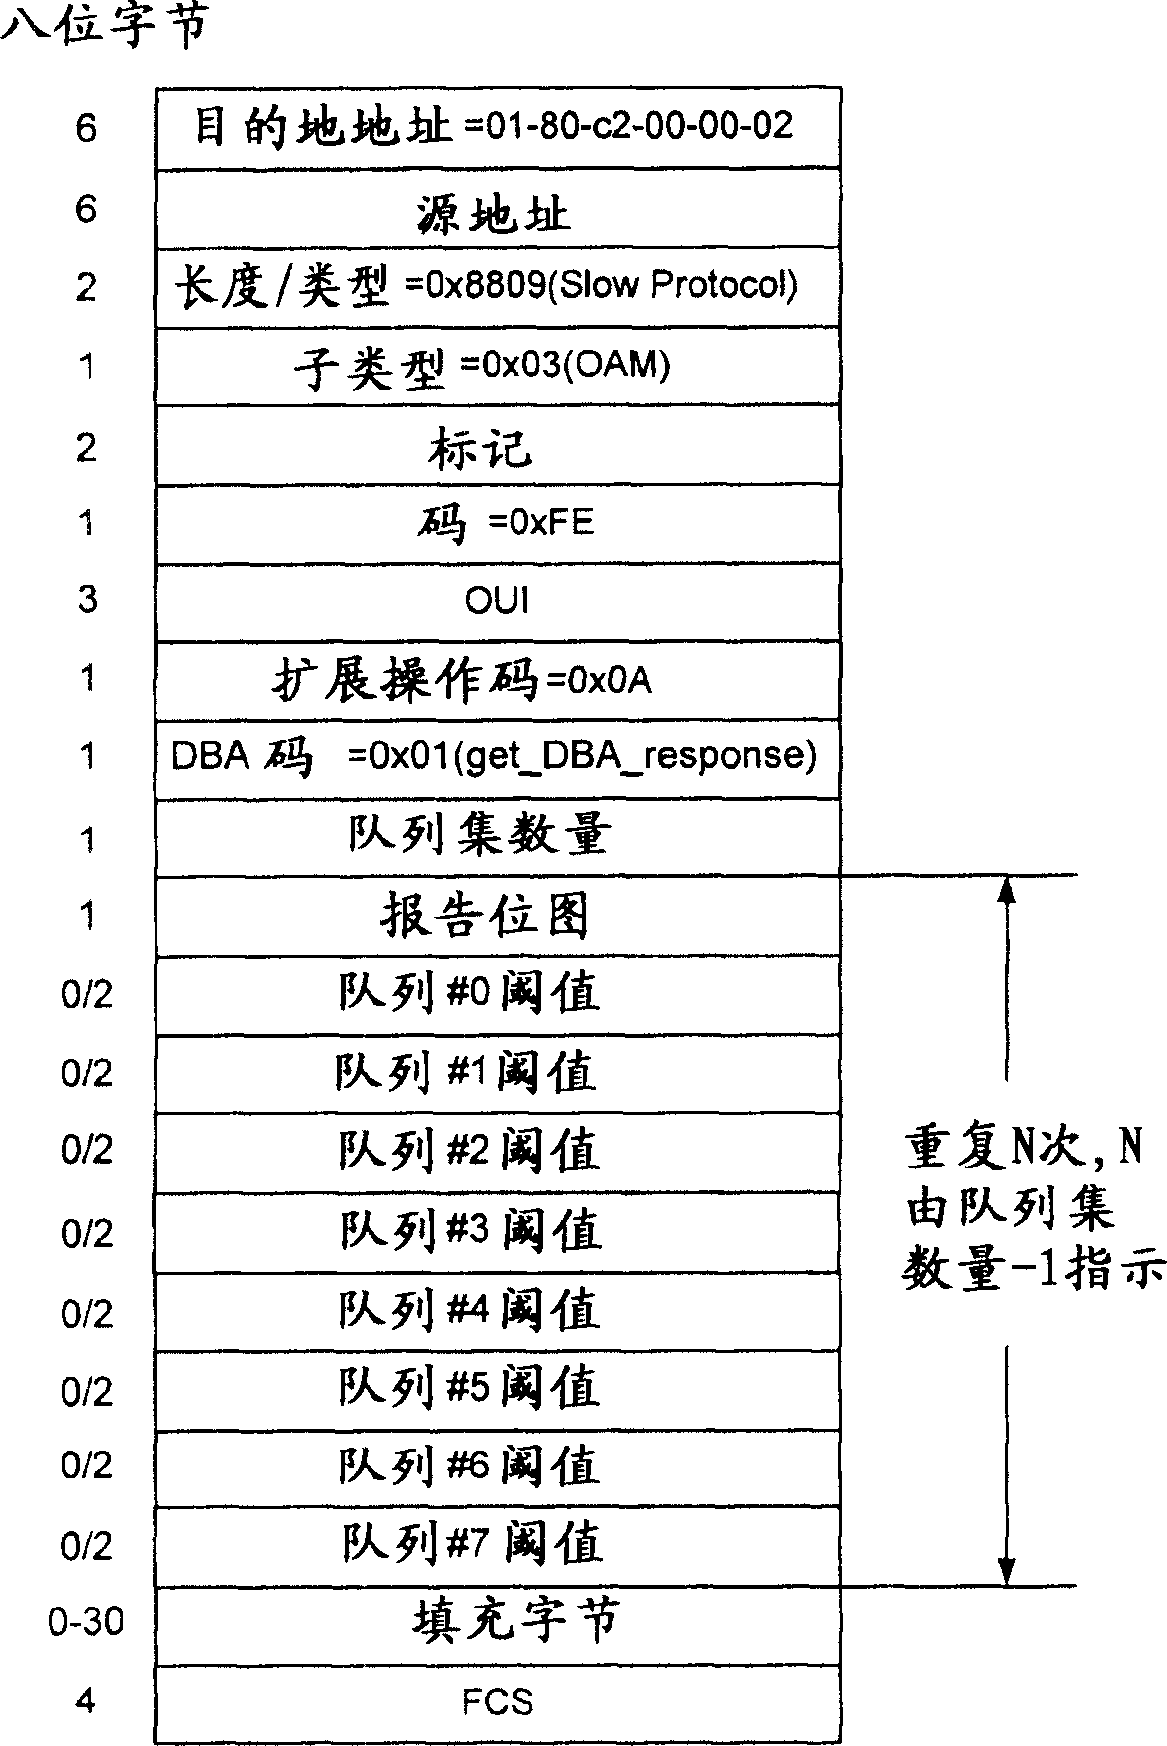 Method for discovering dynamic band width distributing ability and configuring parameter based on timer